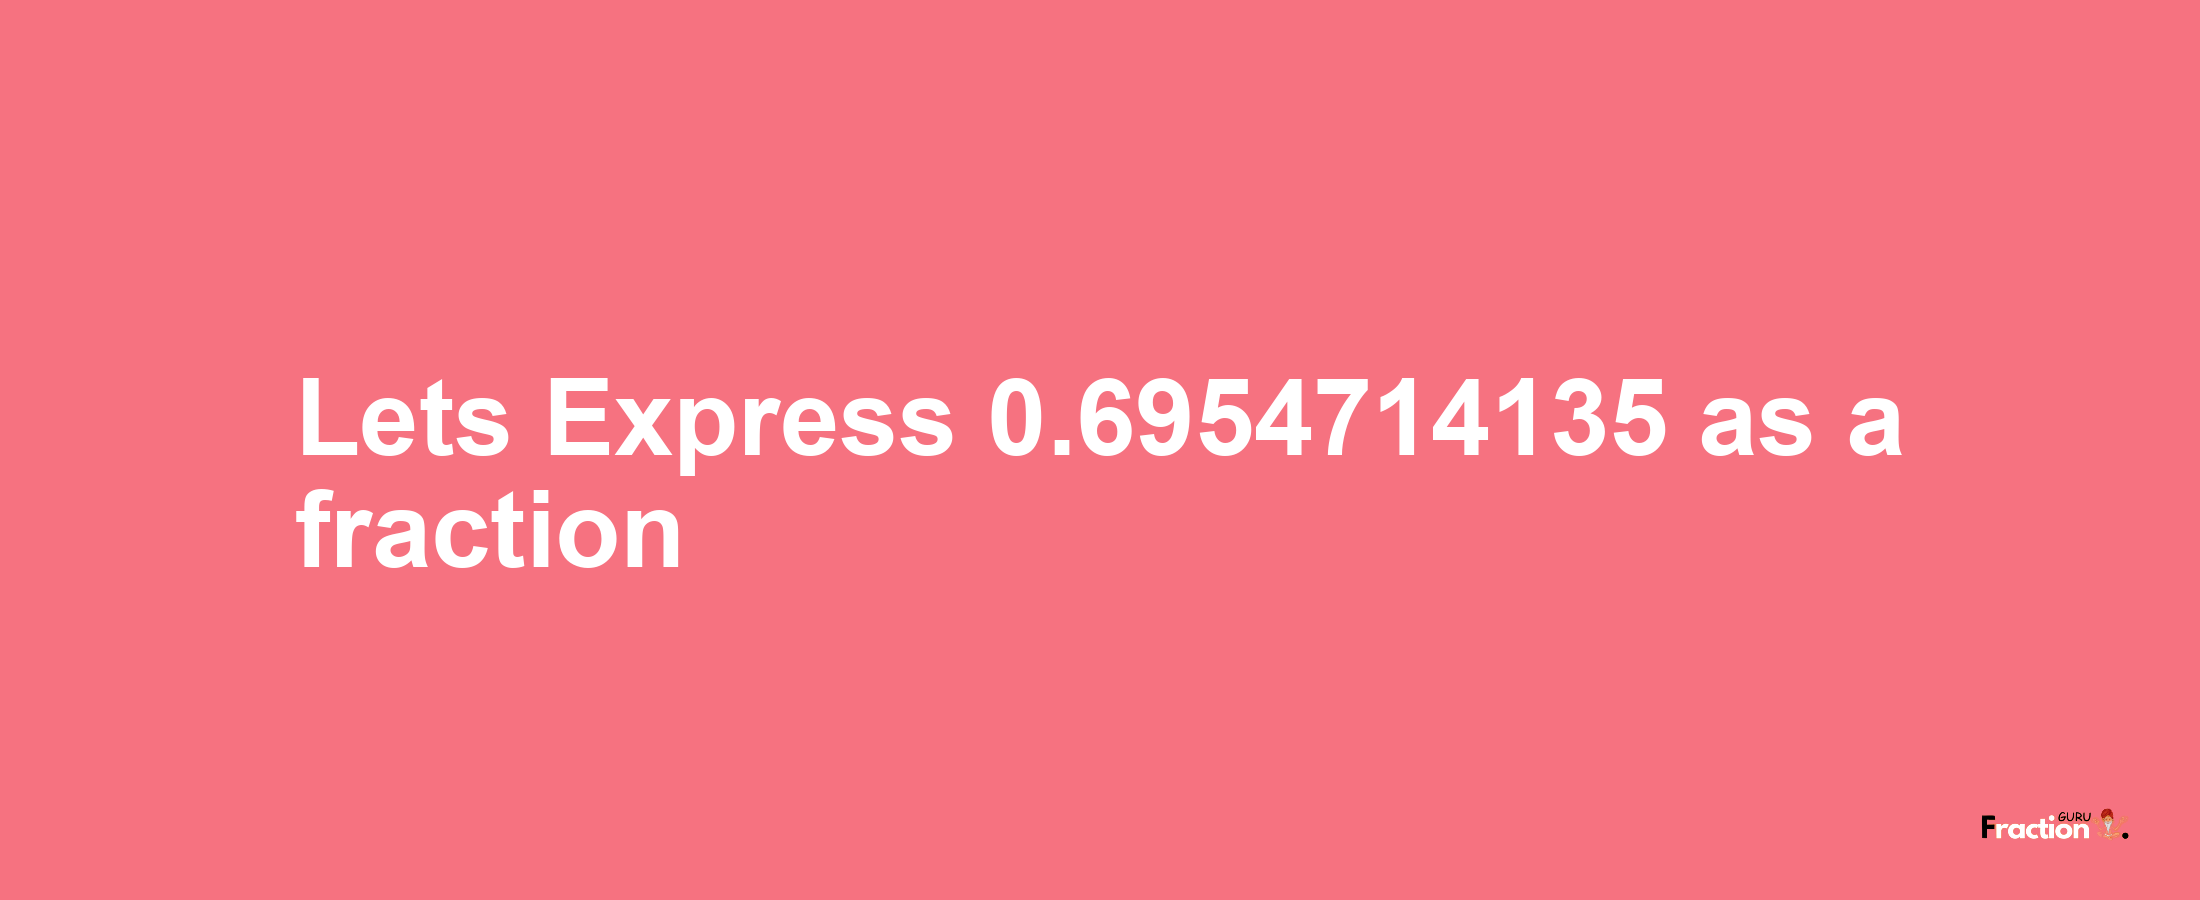 Lets Express 0.6954714135 as afraction